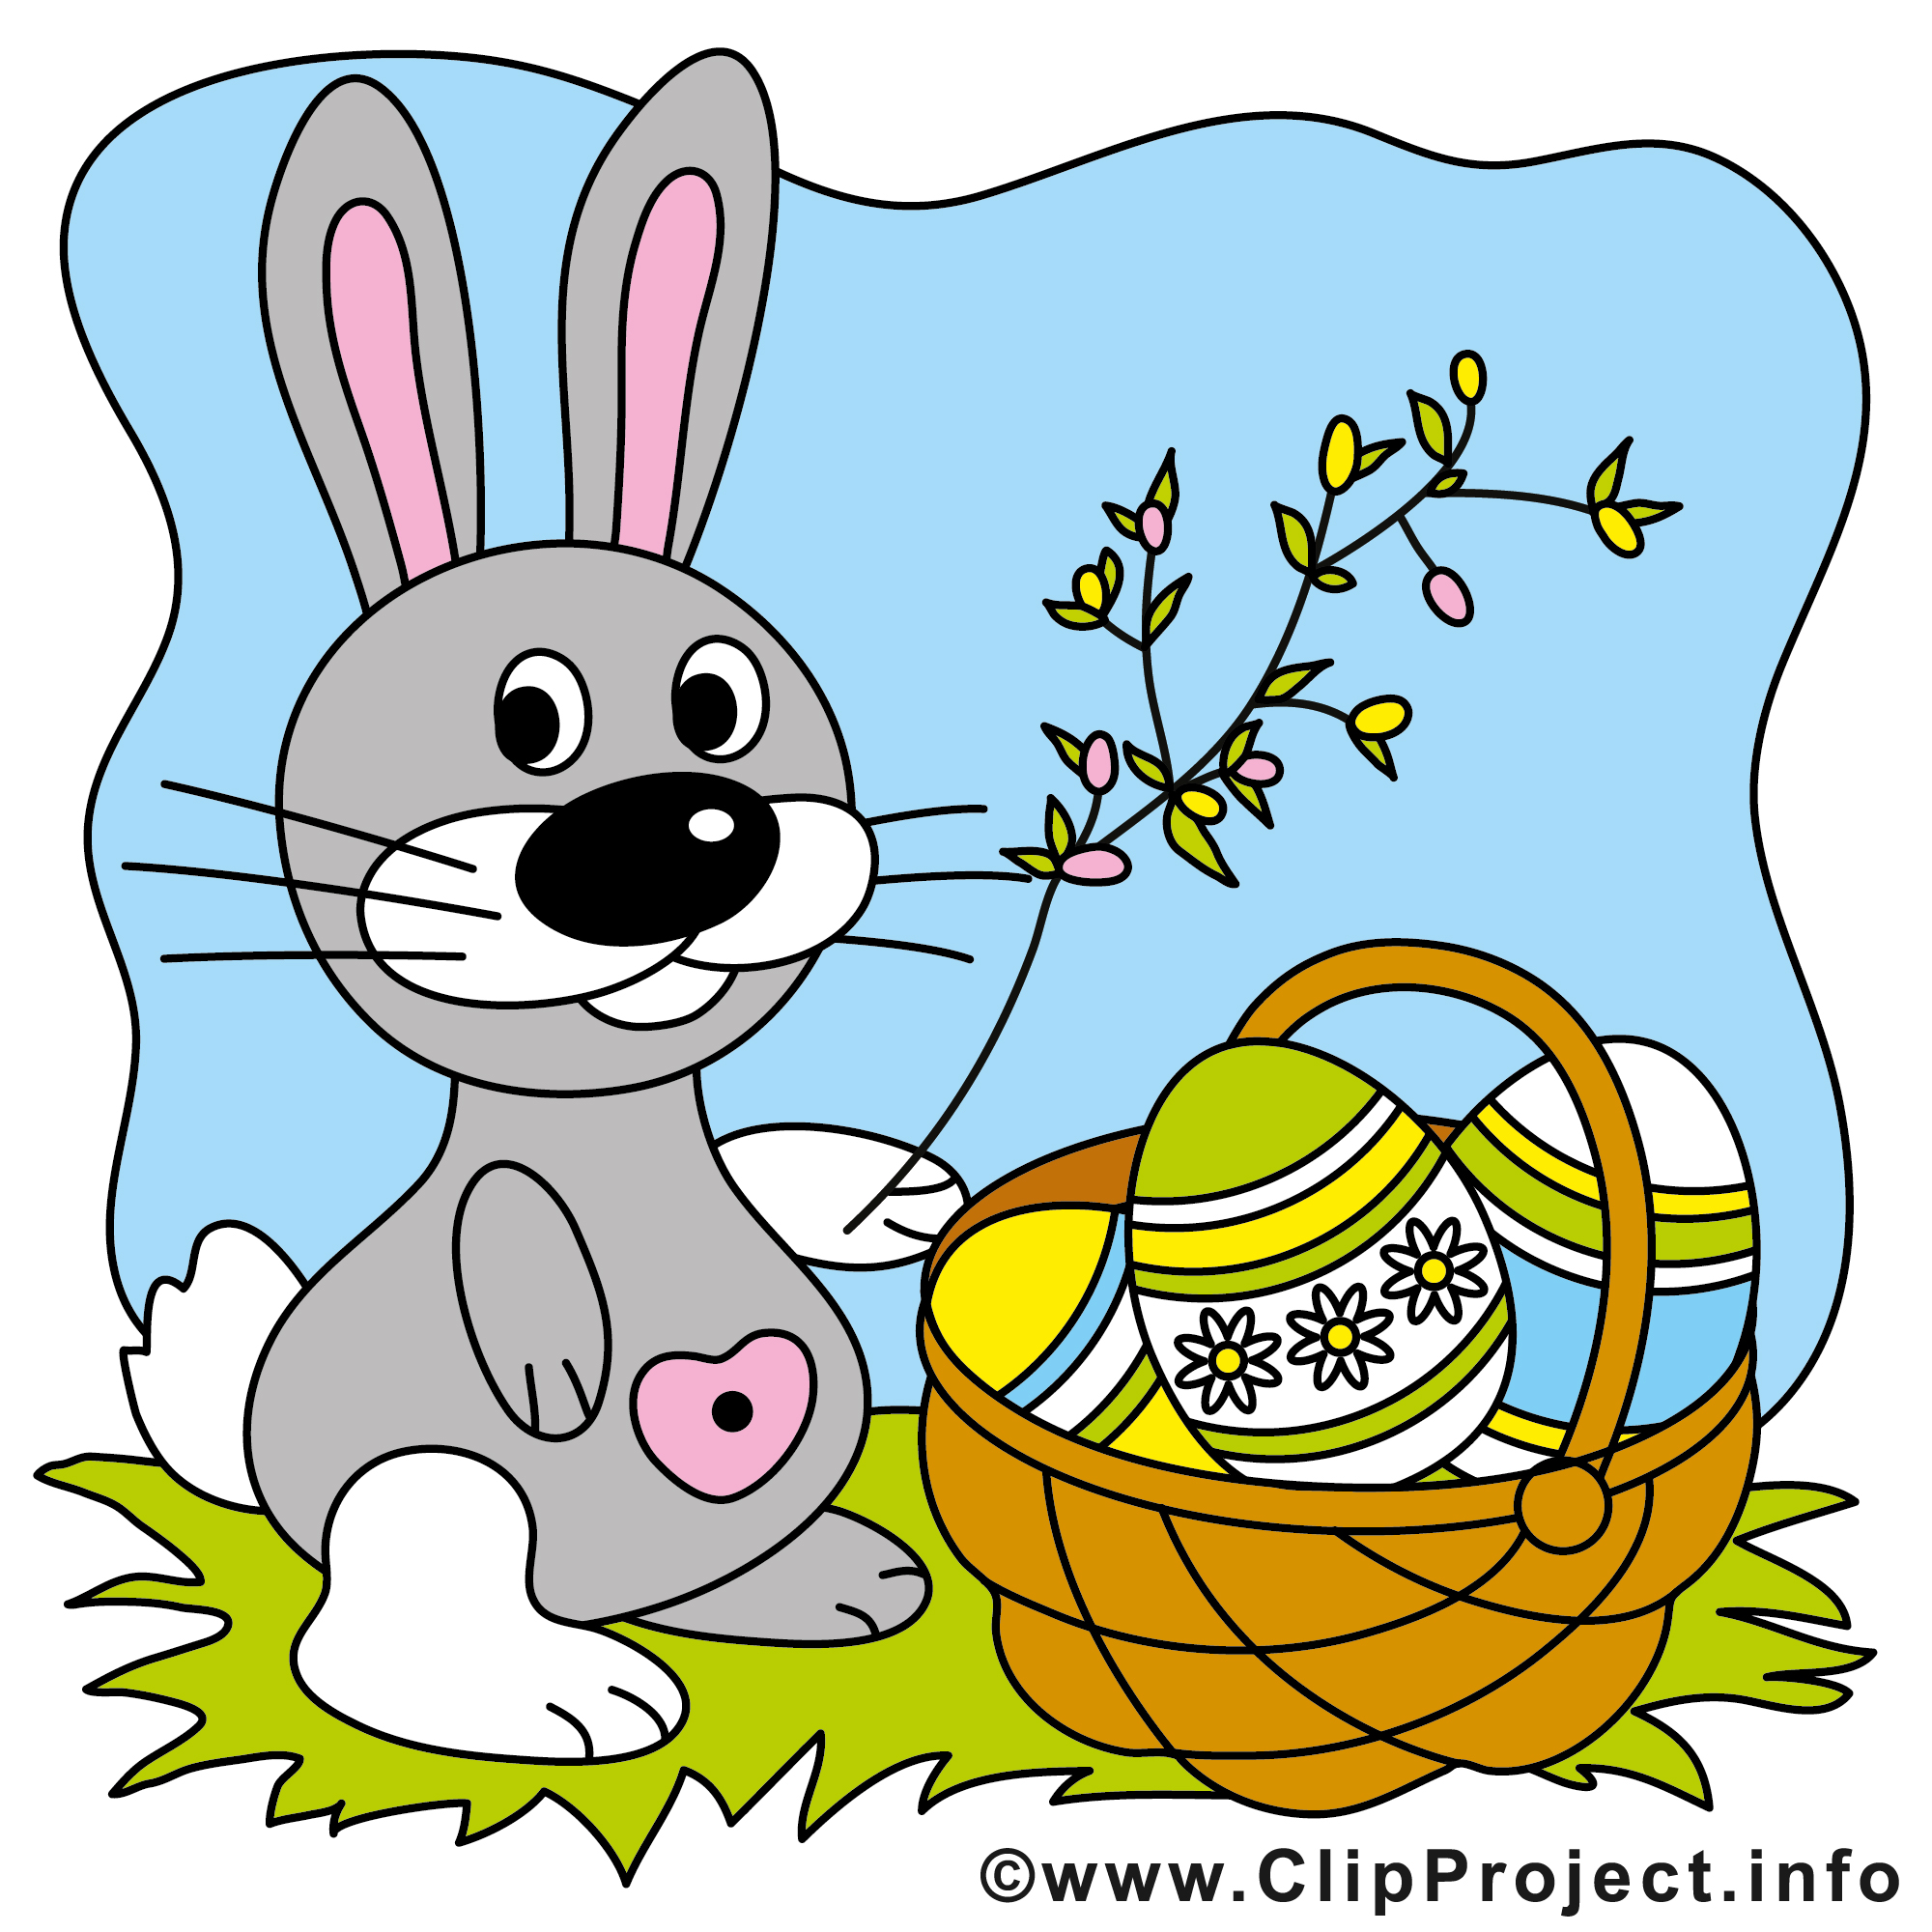 Osterhase clipart 11 » Clipart Station.